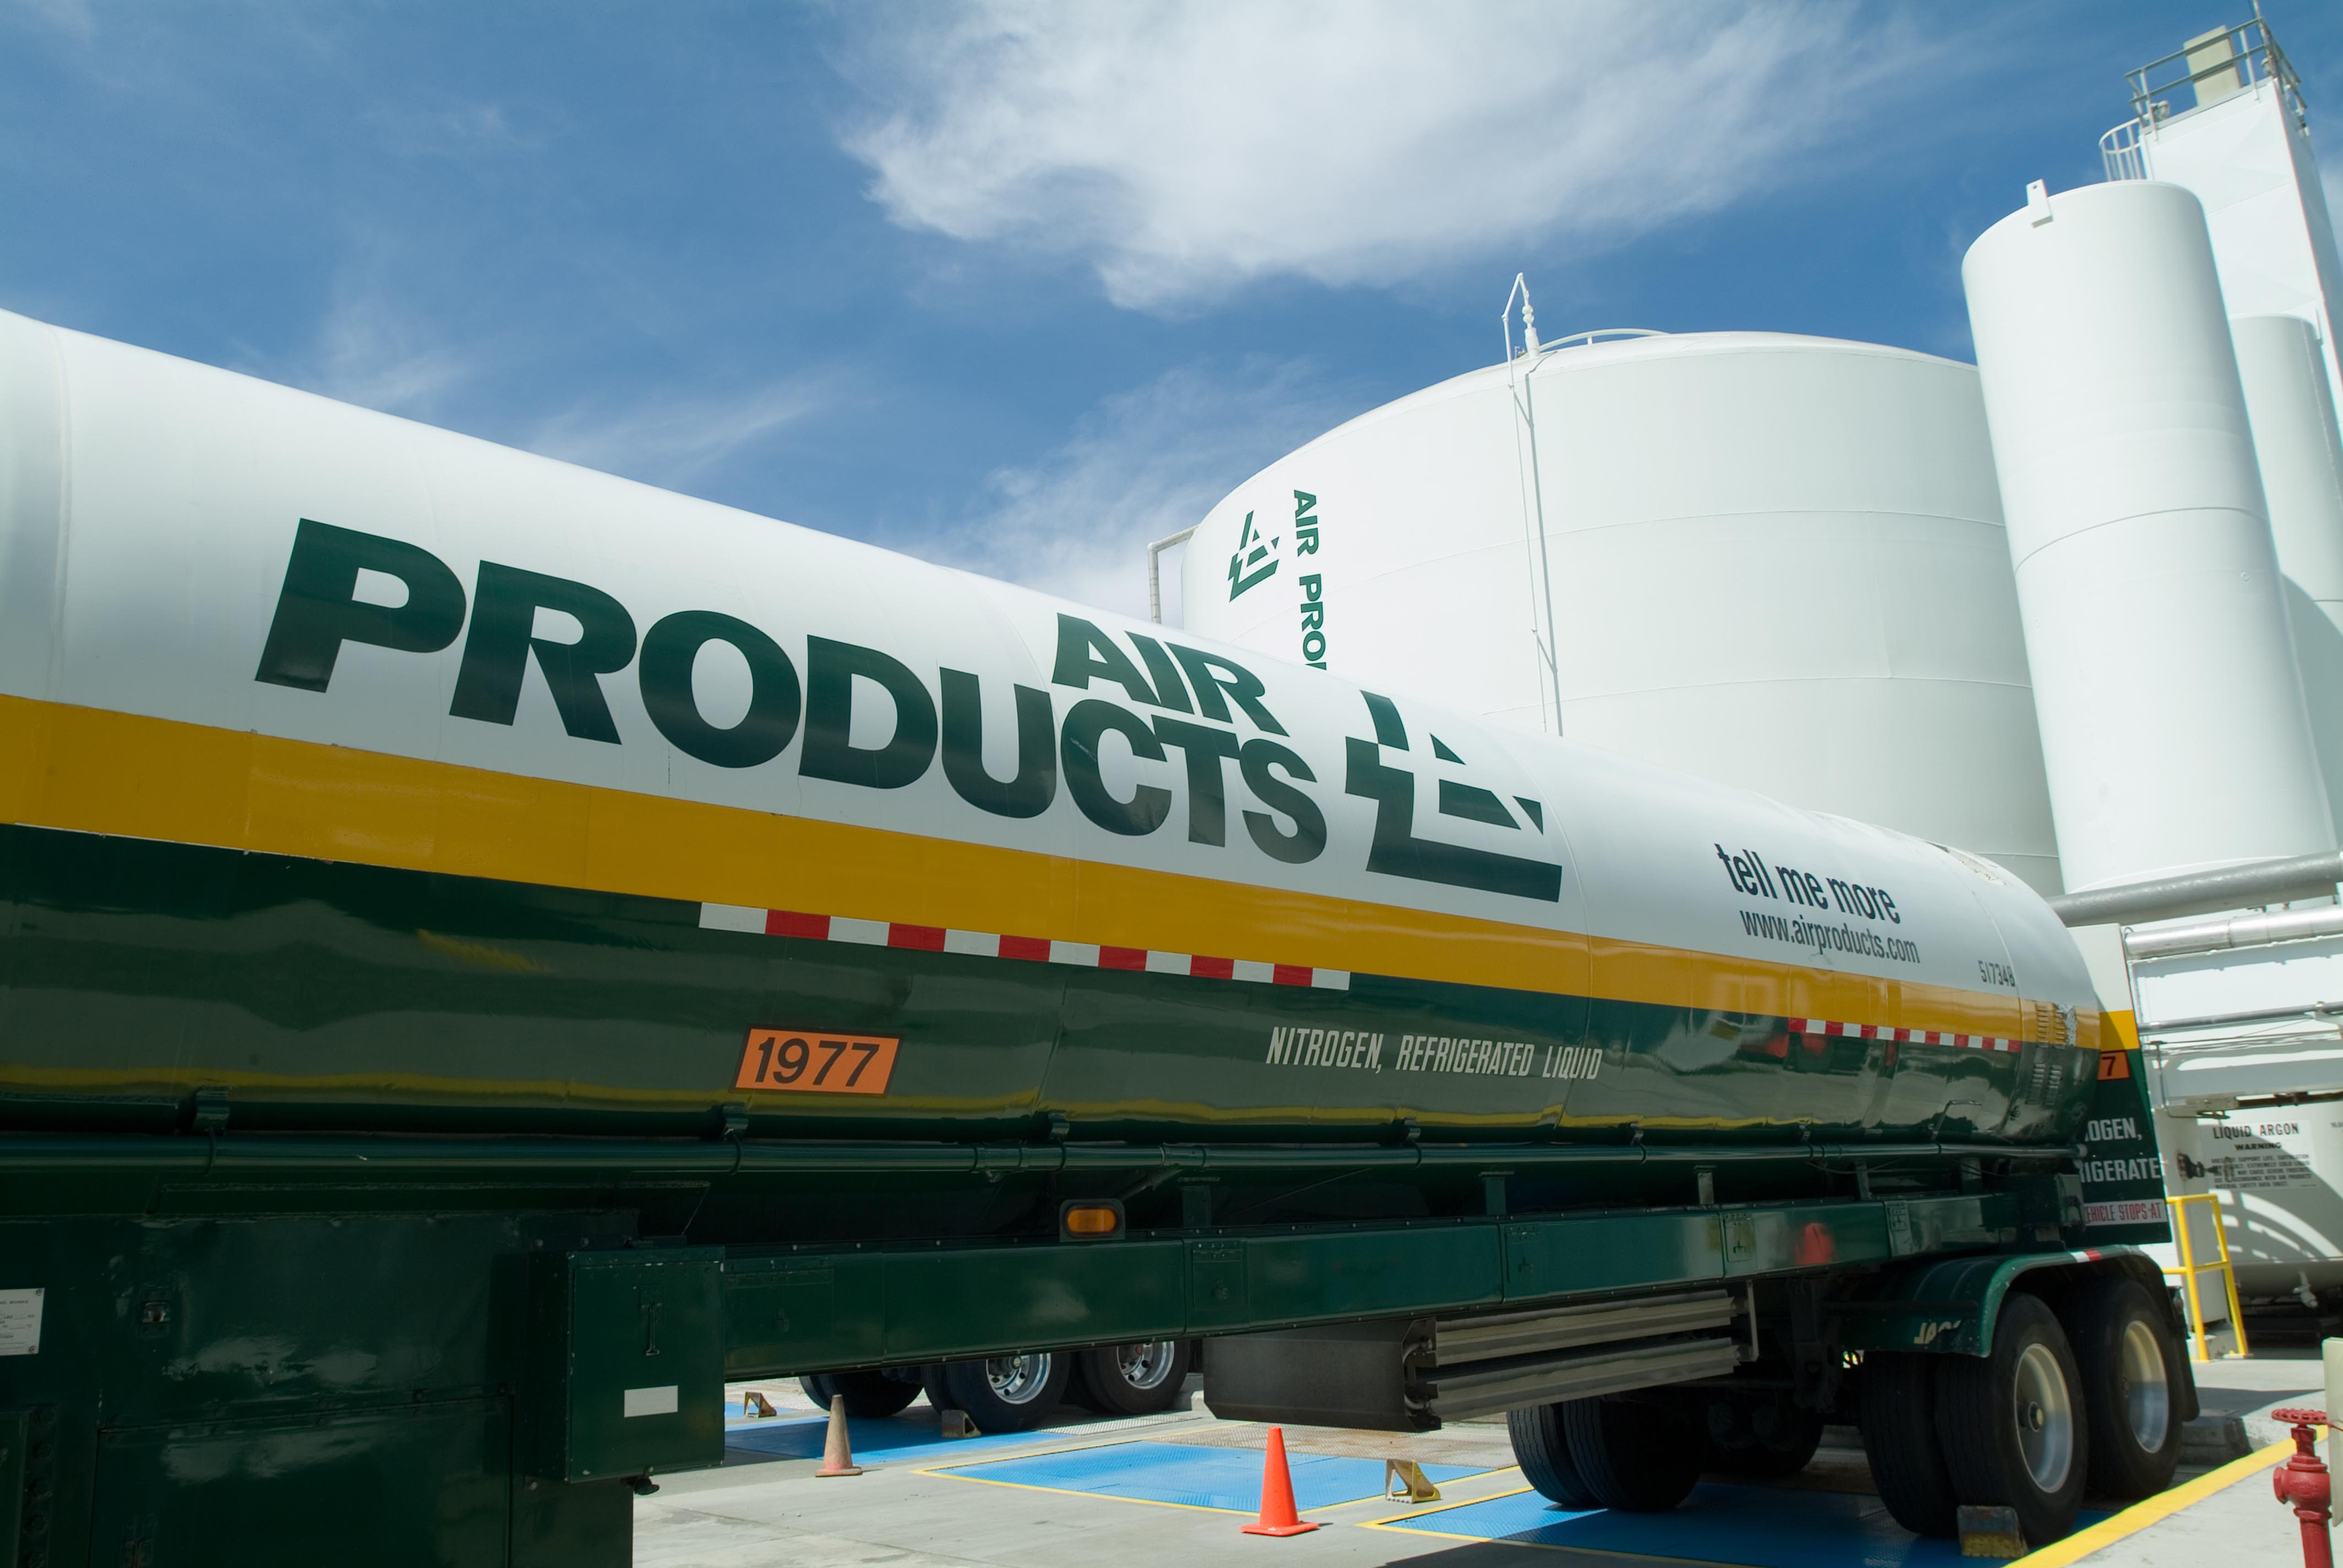 Air Products tanker truck